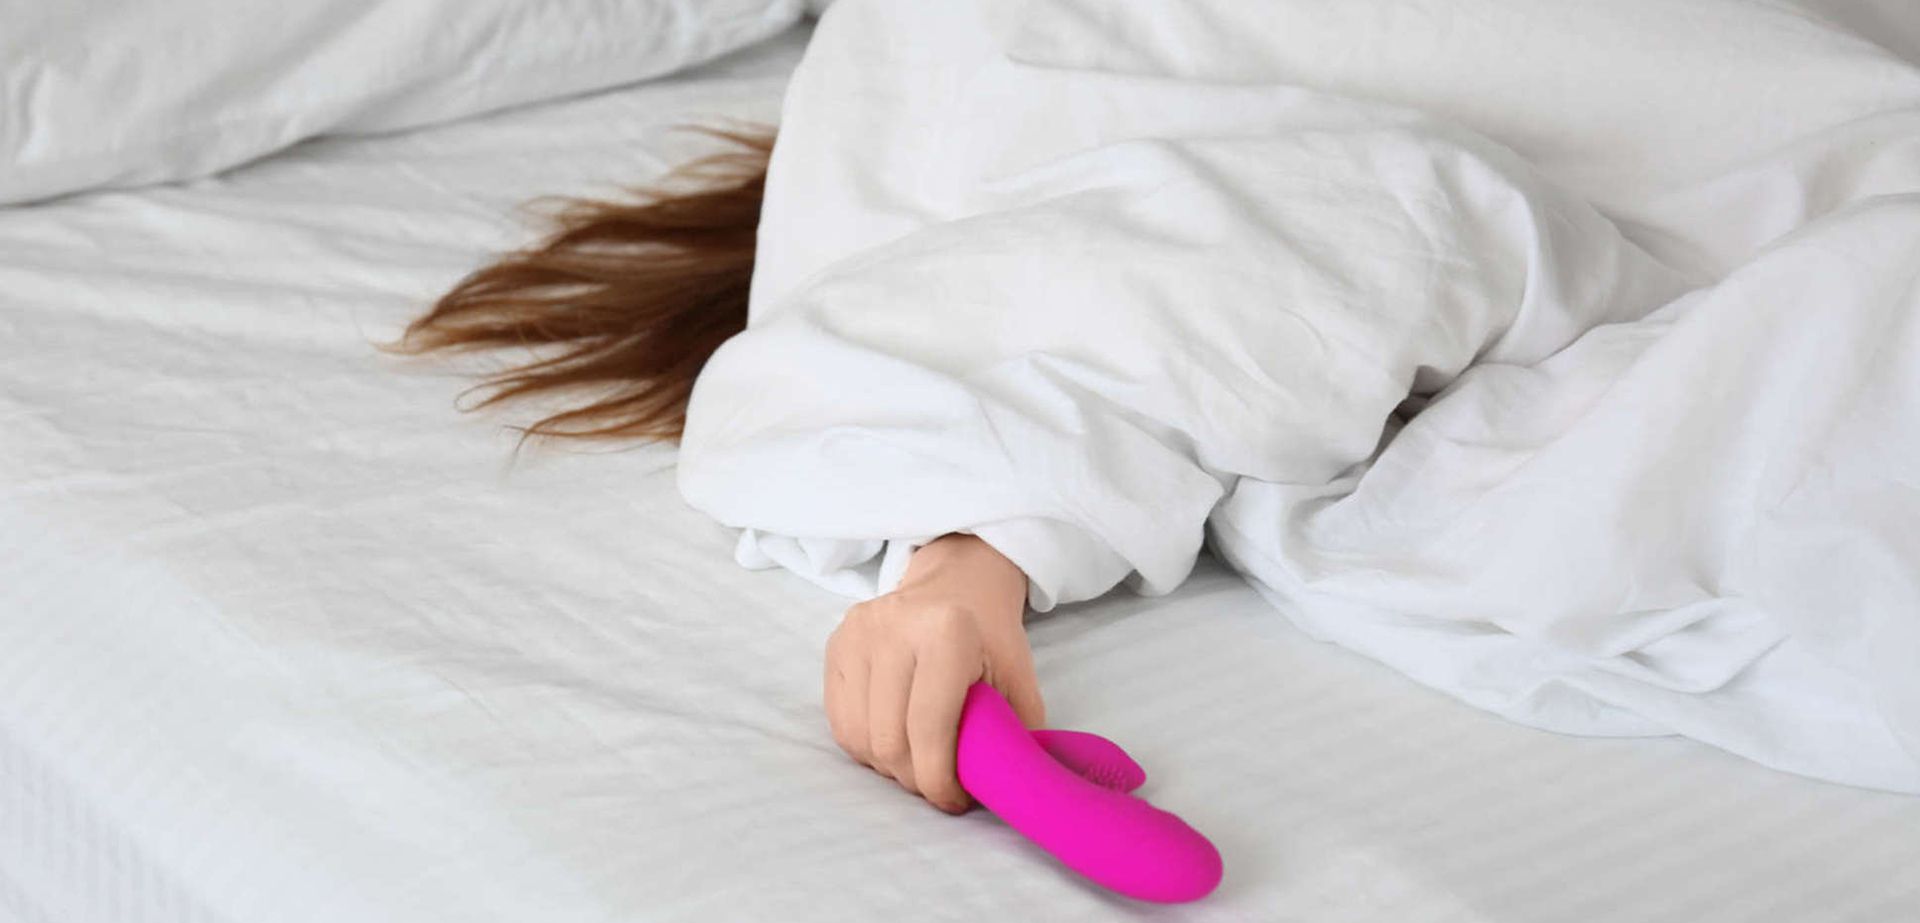 Womam in bed with a dildo.